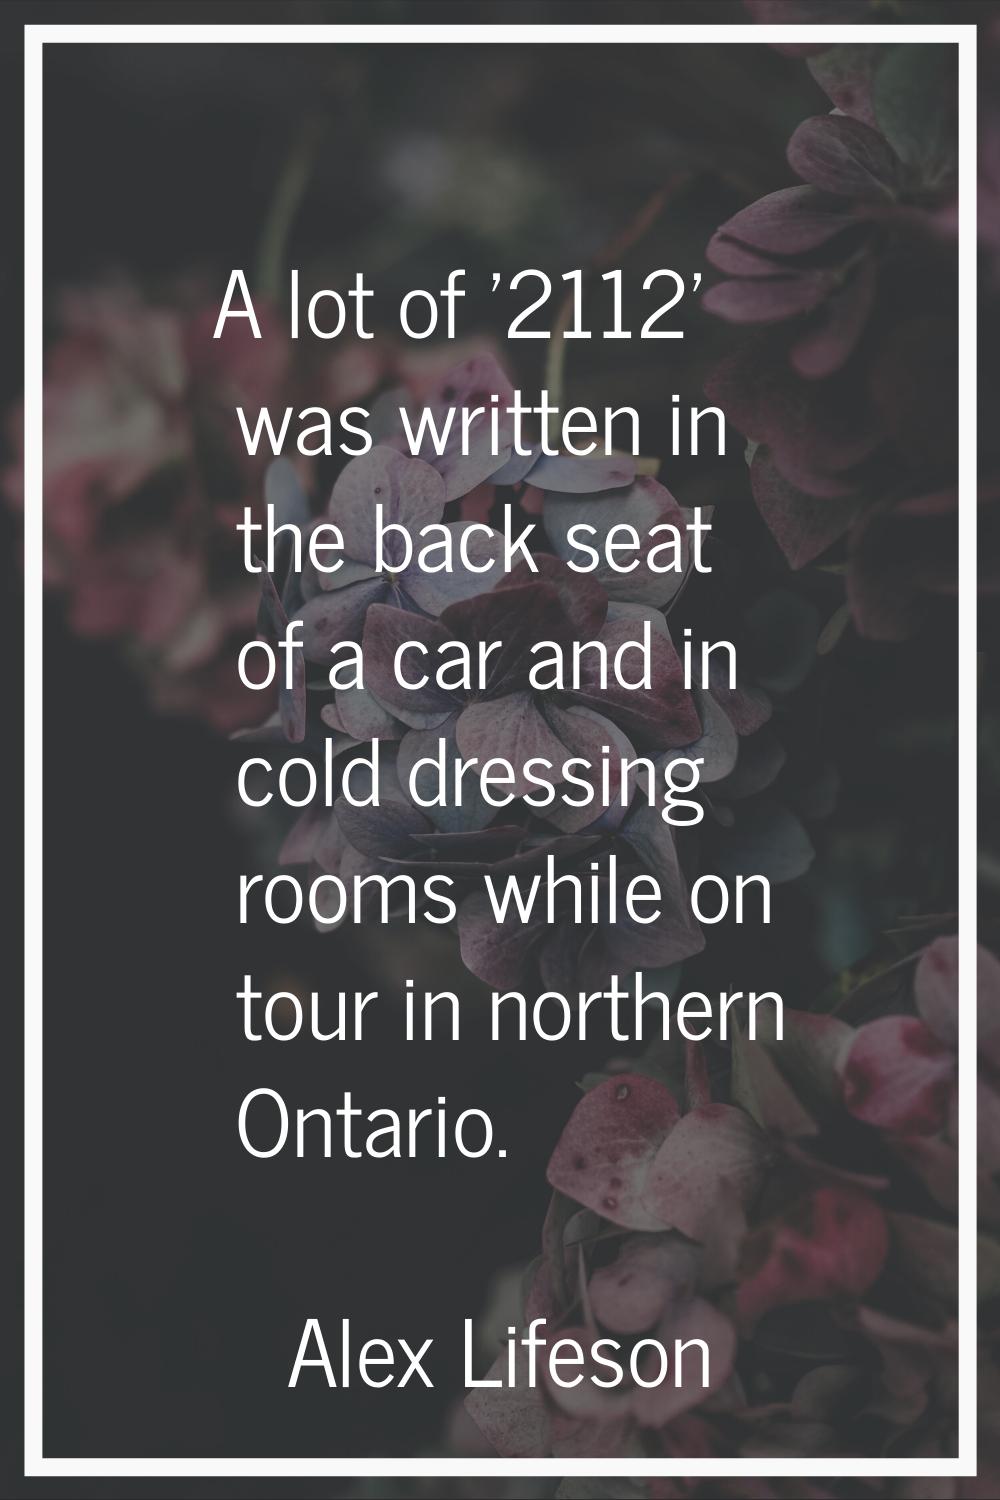 A lot of '2112' was written in the back seat of a car and in cold dressing rooms while on tour in n